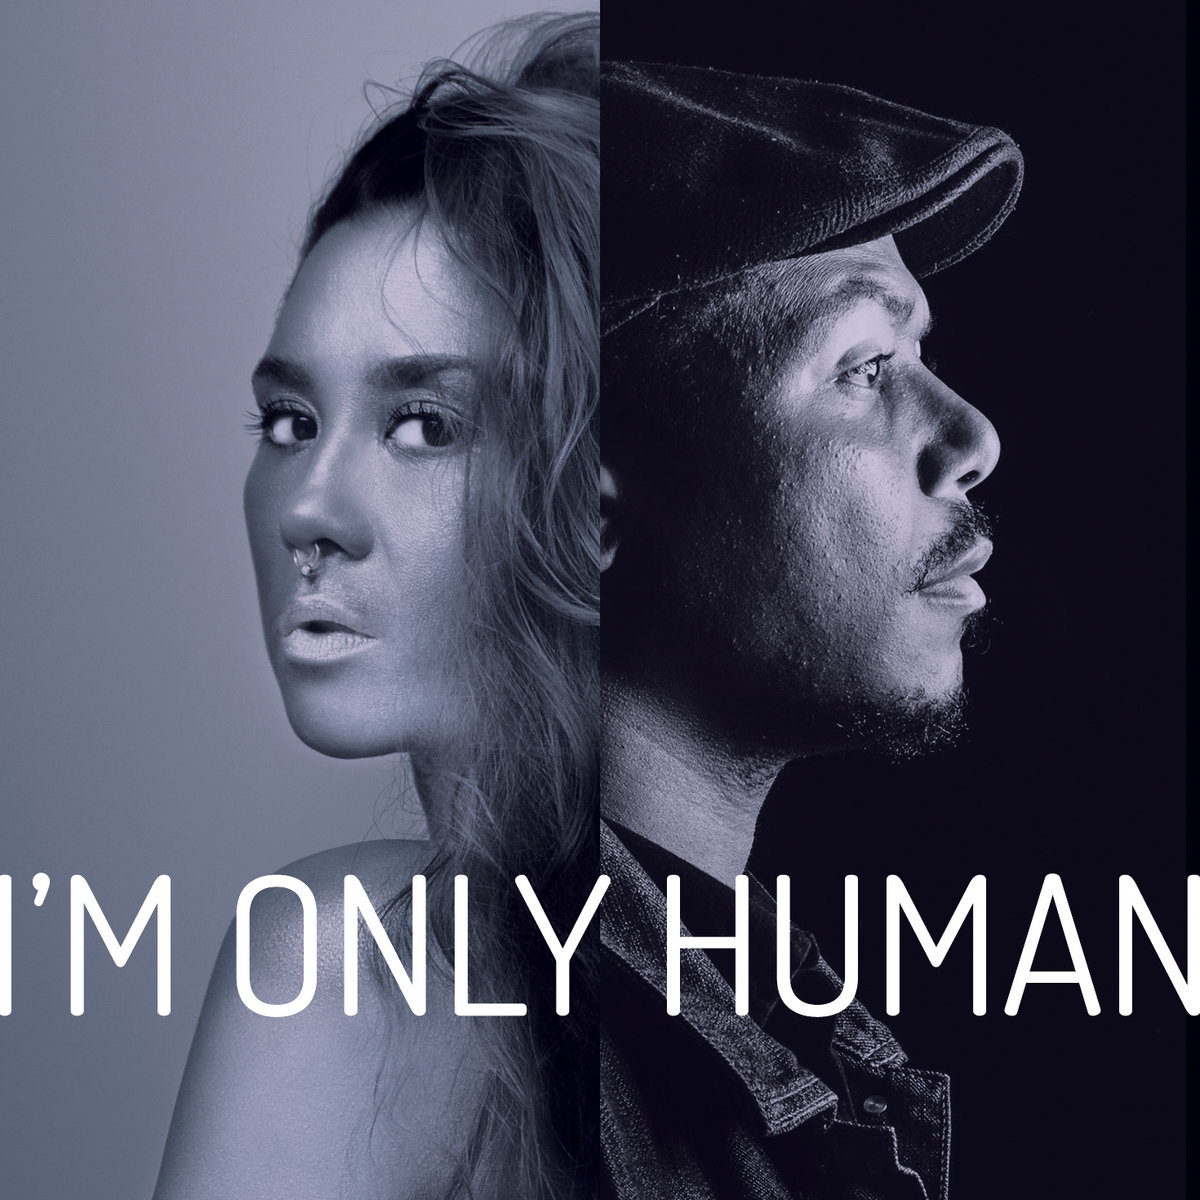 Im only Human. I am only Human. Энтони Хьюмен. I am only Human кухня. Human mp3